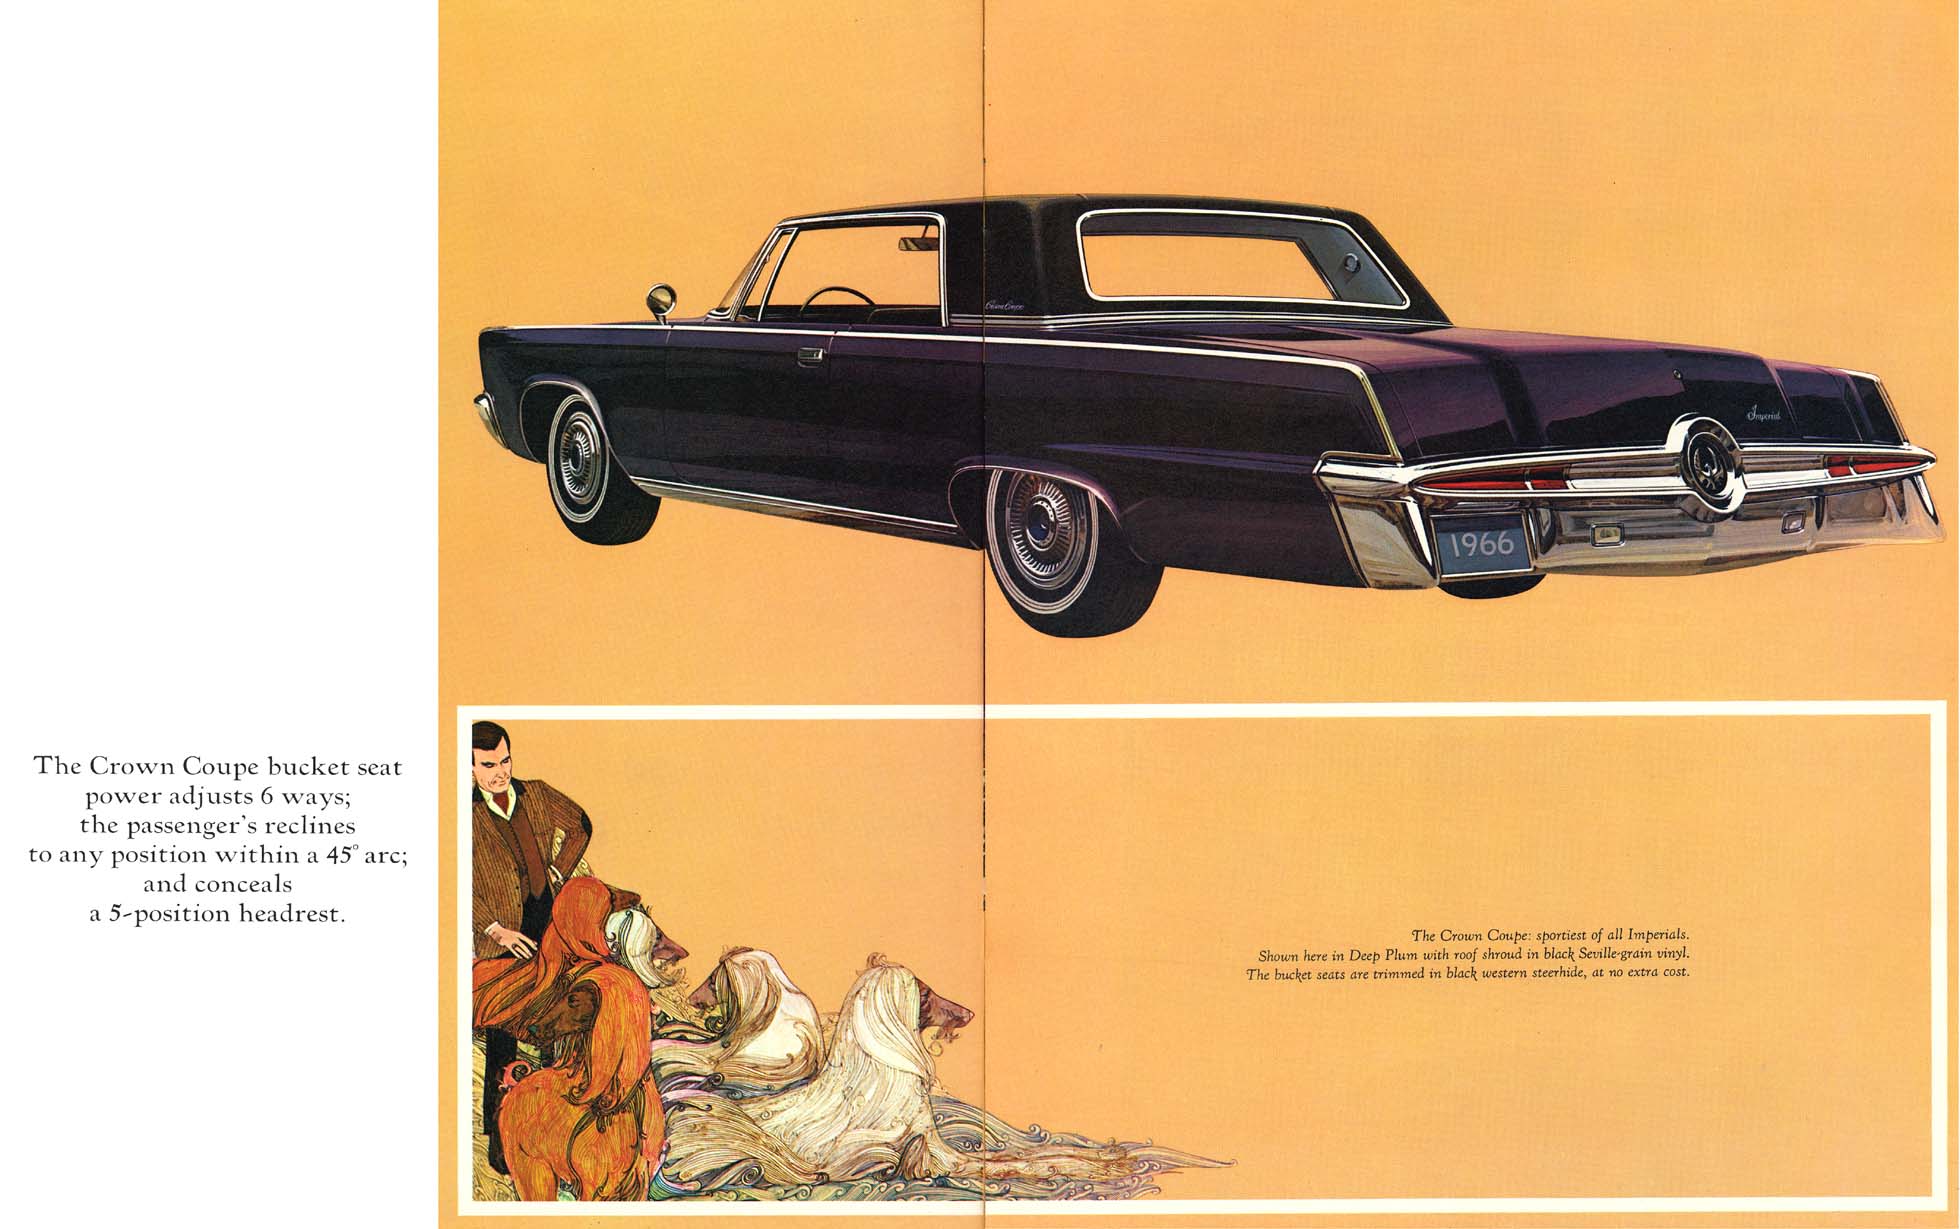 1966 Chrysler Imperial Brochure Page 4